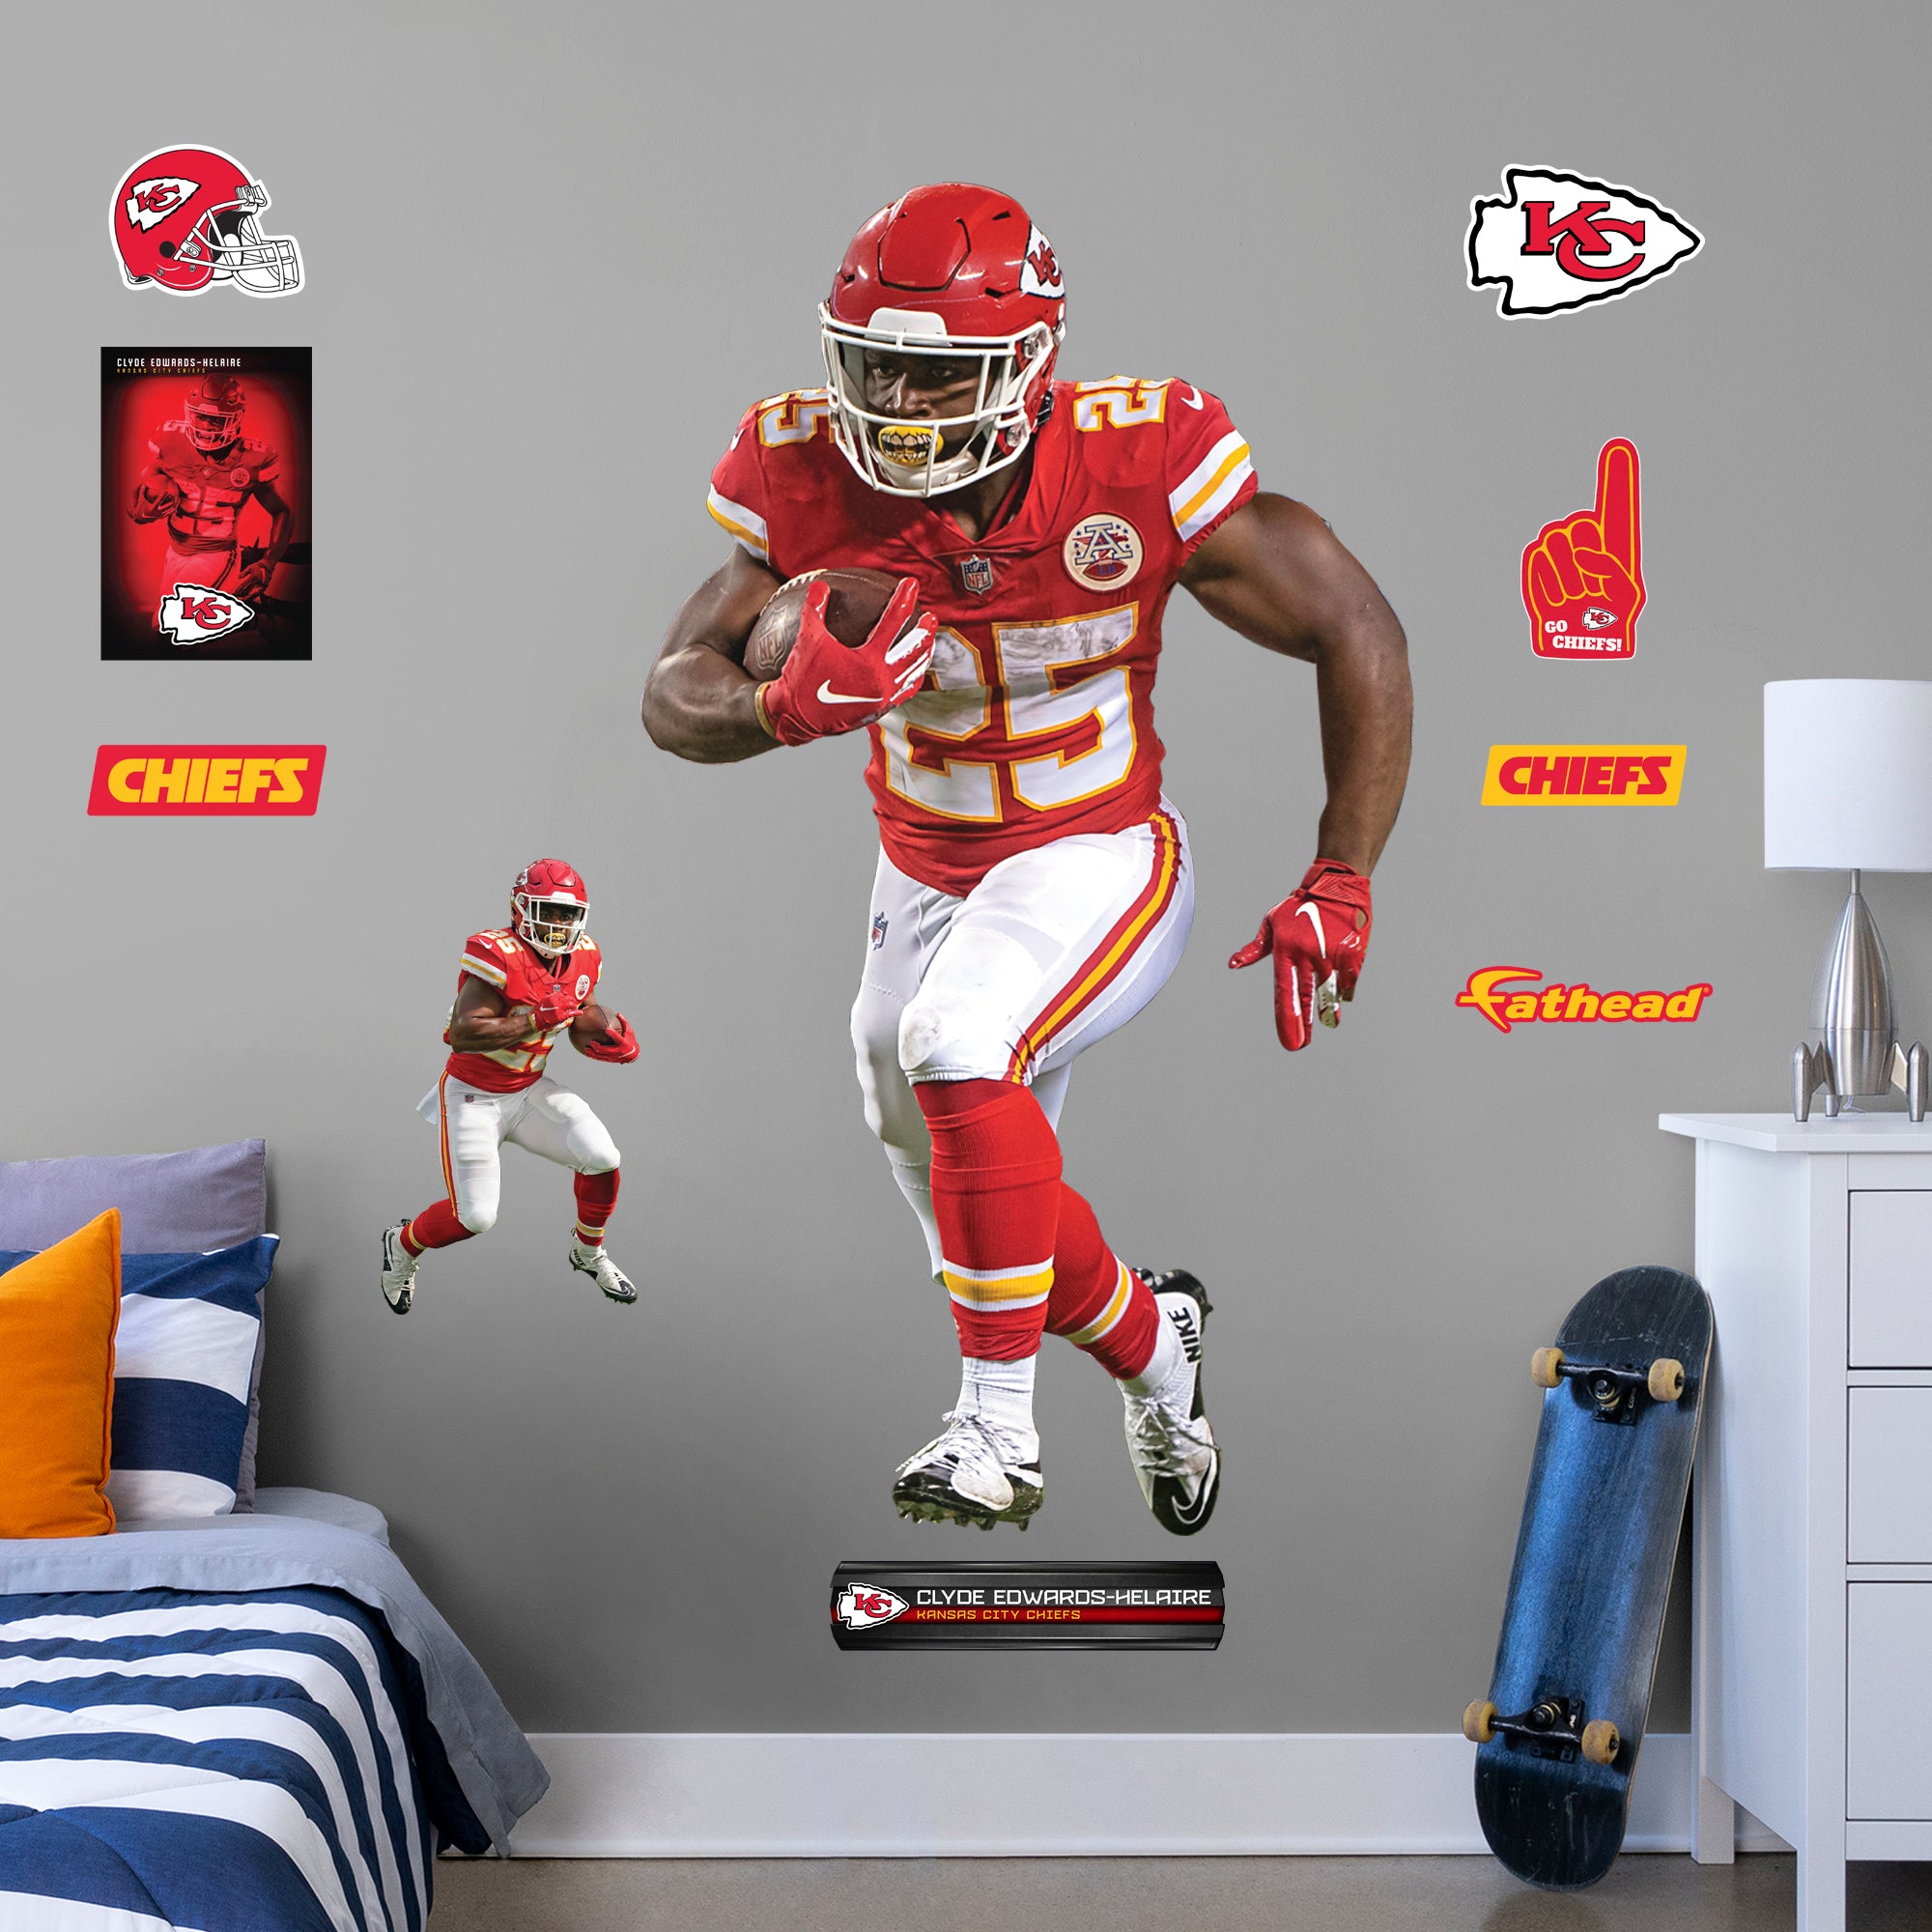 Clyde Edwards-Helaire: RealBig Officially Licensed NFL Removable Wall Decal Life-Size Athlete + 8 Decals by Fathead | Vinyl